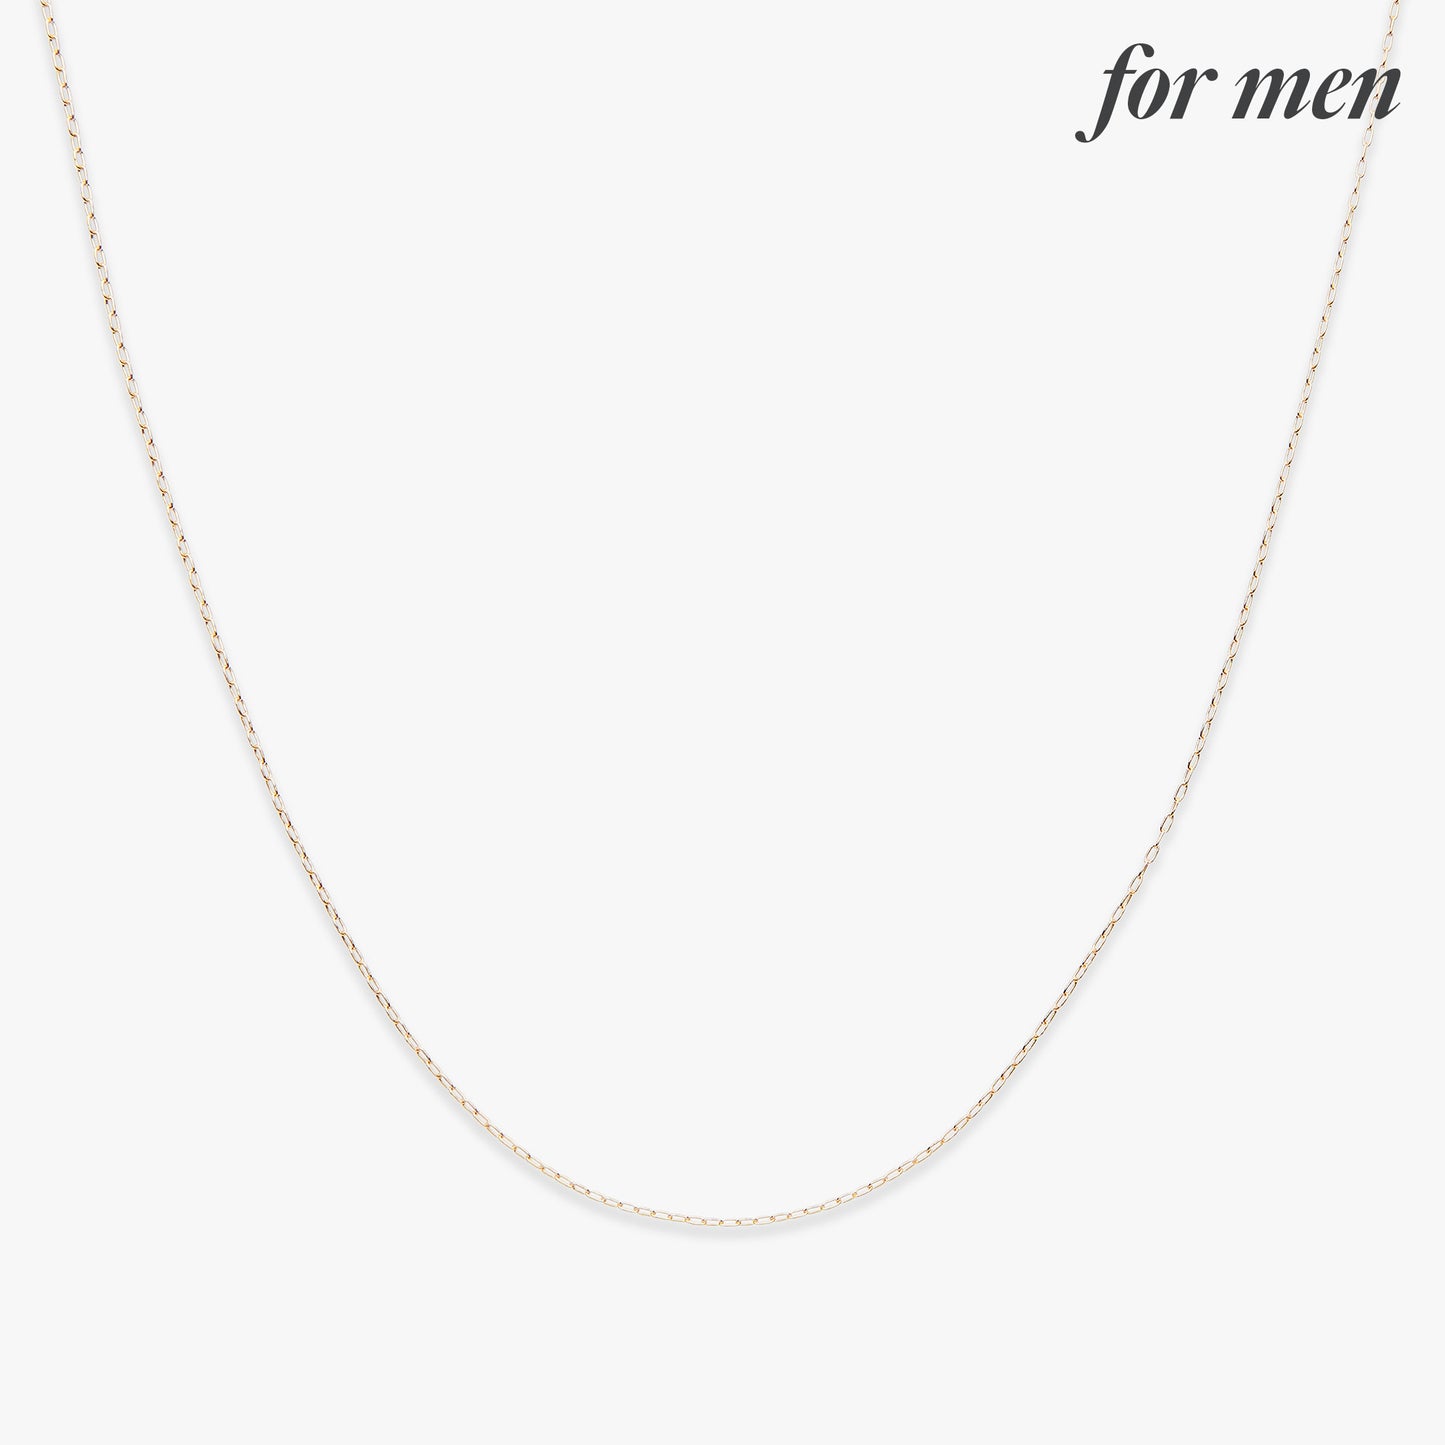 Basic drawn cable chain ketting gold filled voor mannen